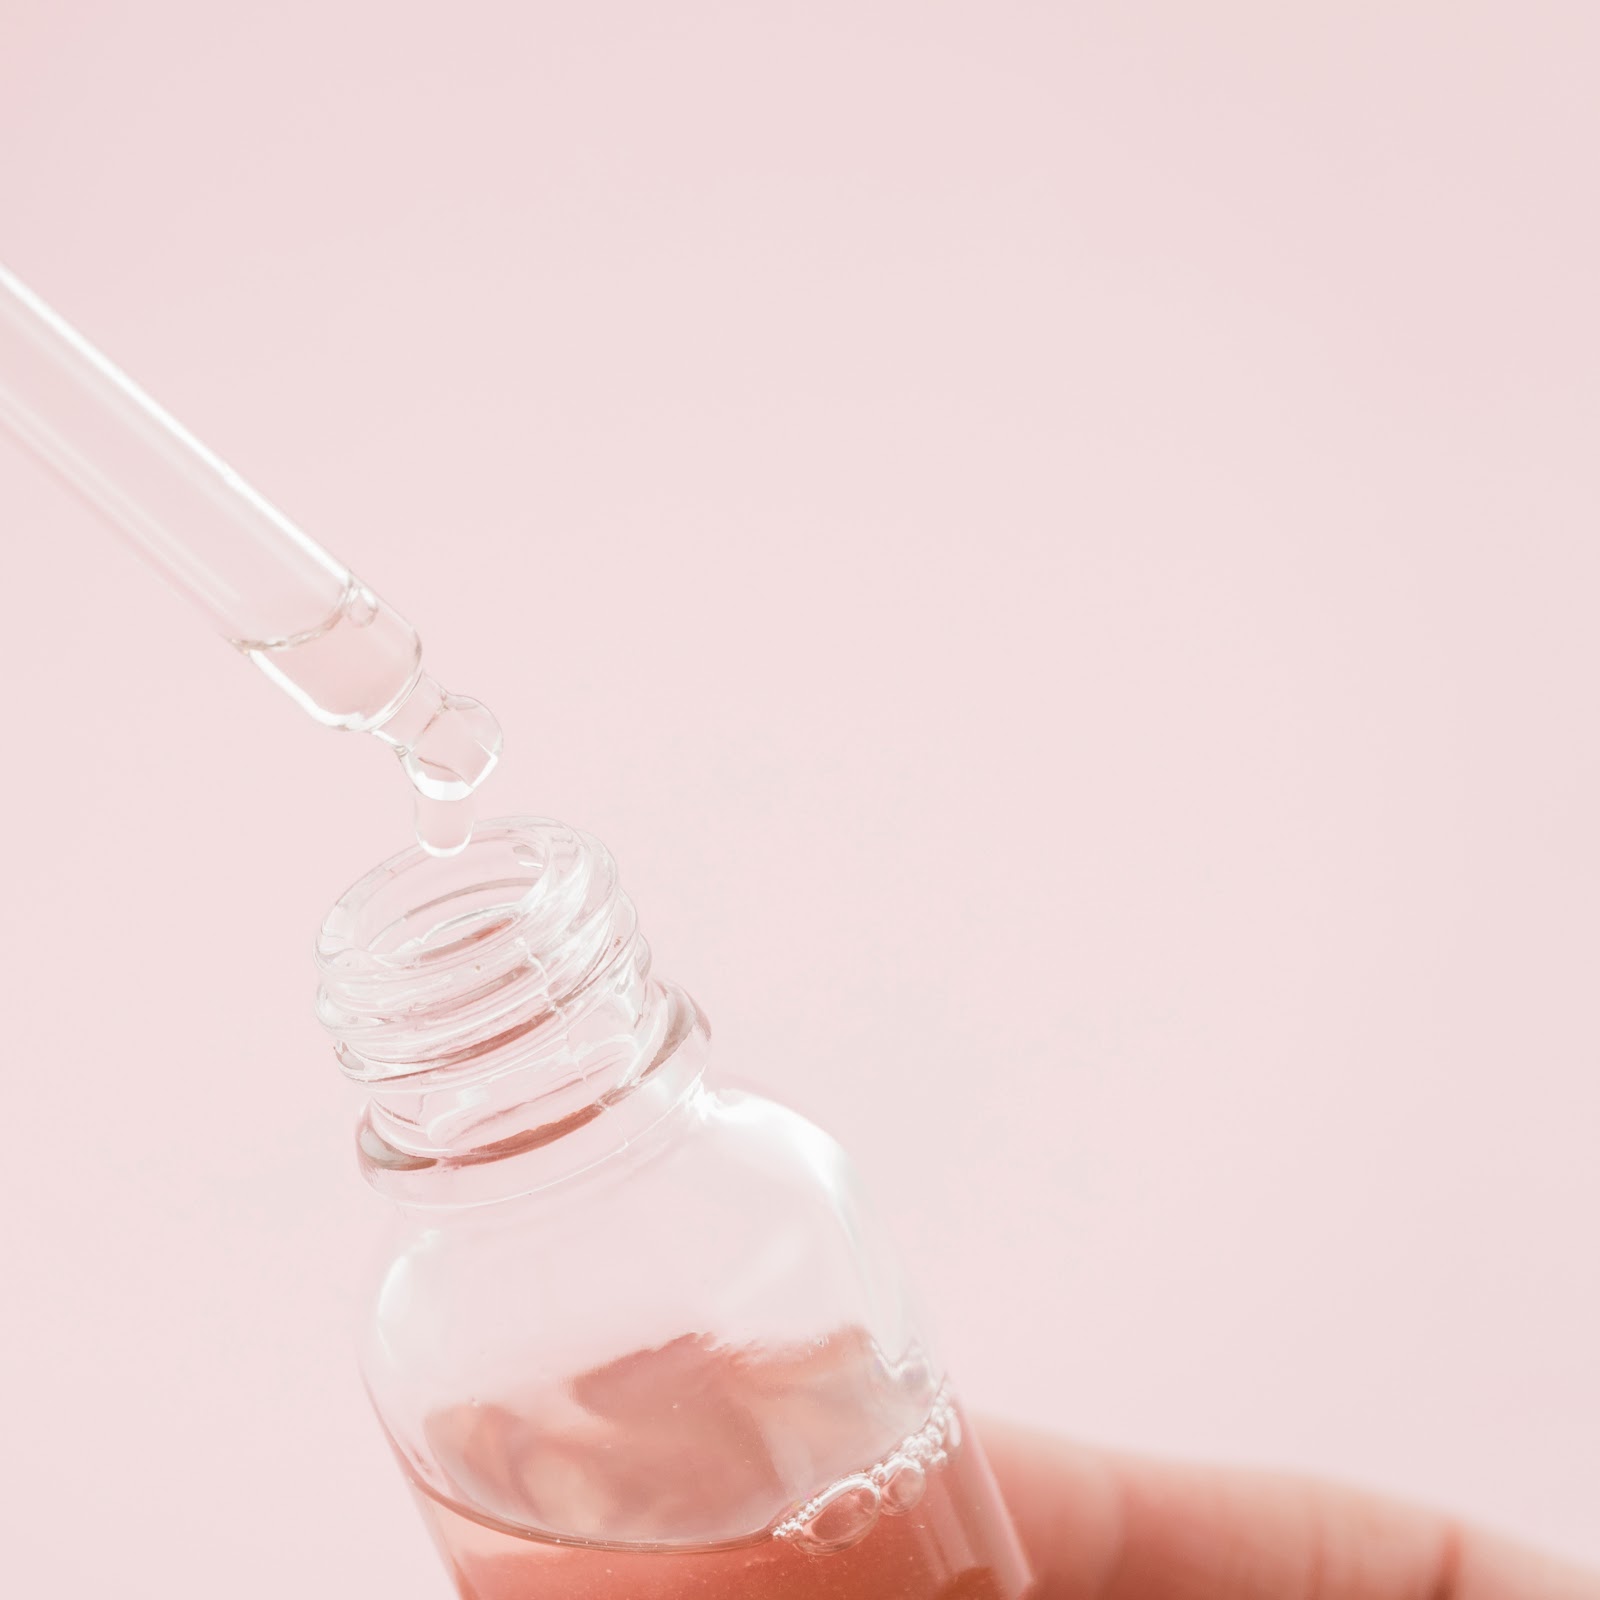 Know your ingredients: Niacinamide 